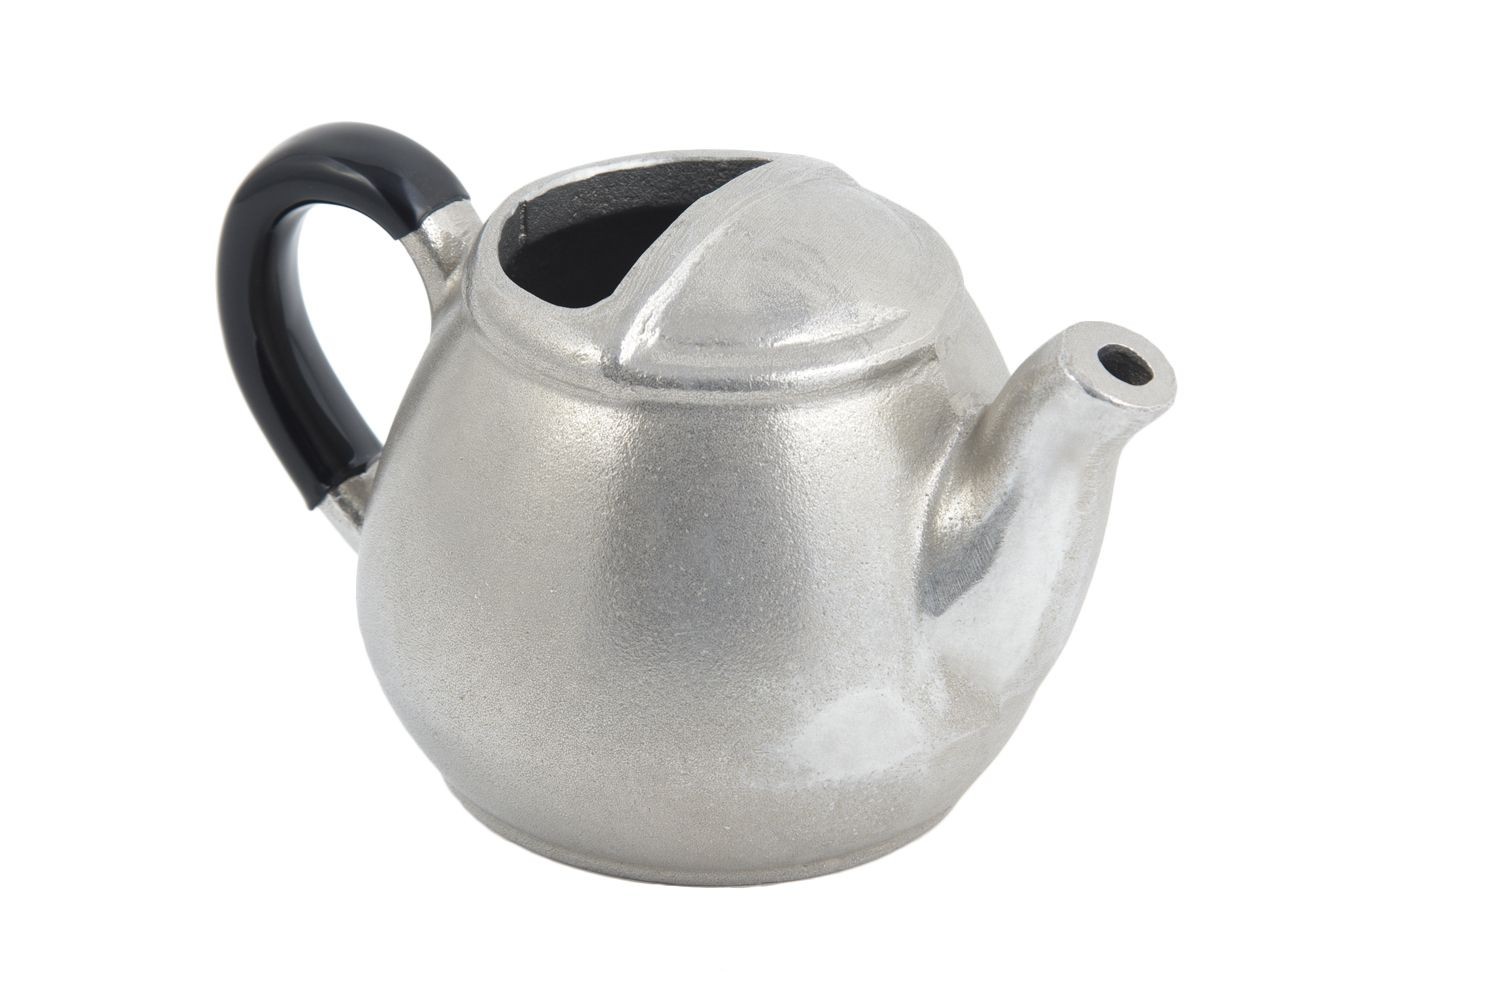 Bon Chef 4040S Coverless Teapot with Insulated Handle, Sandstone 16 oz., Set of 6